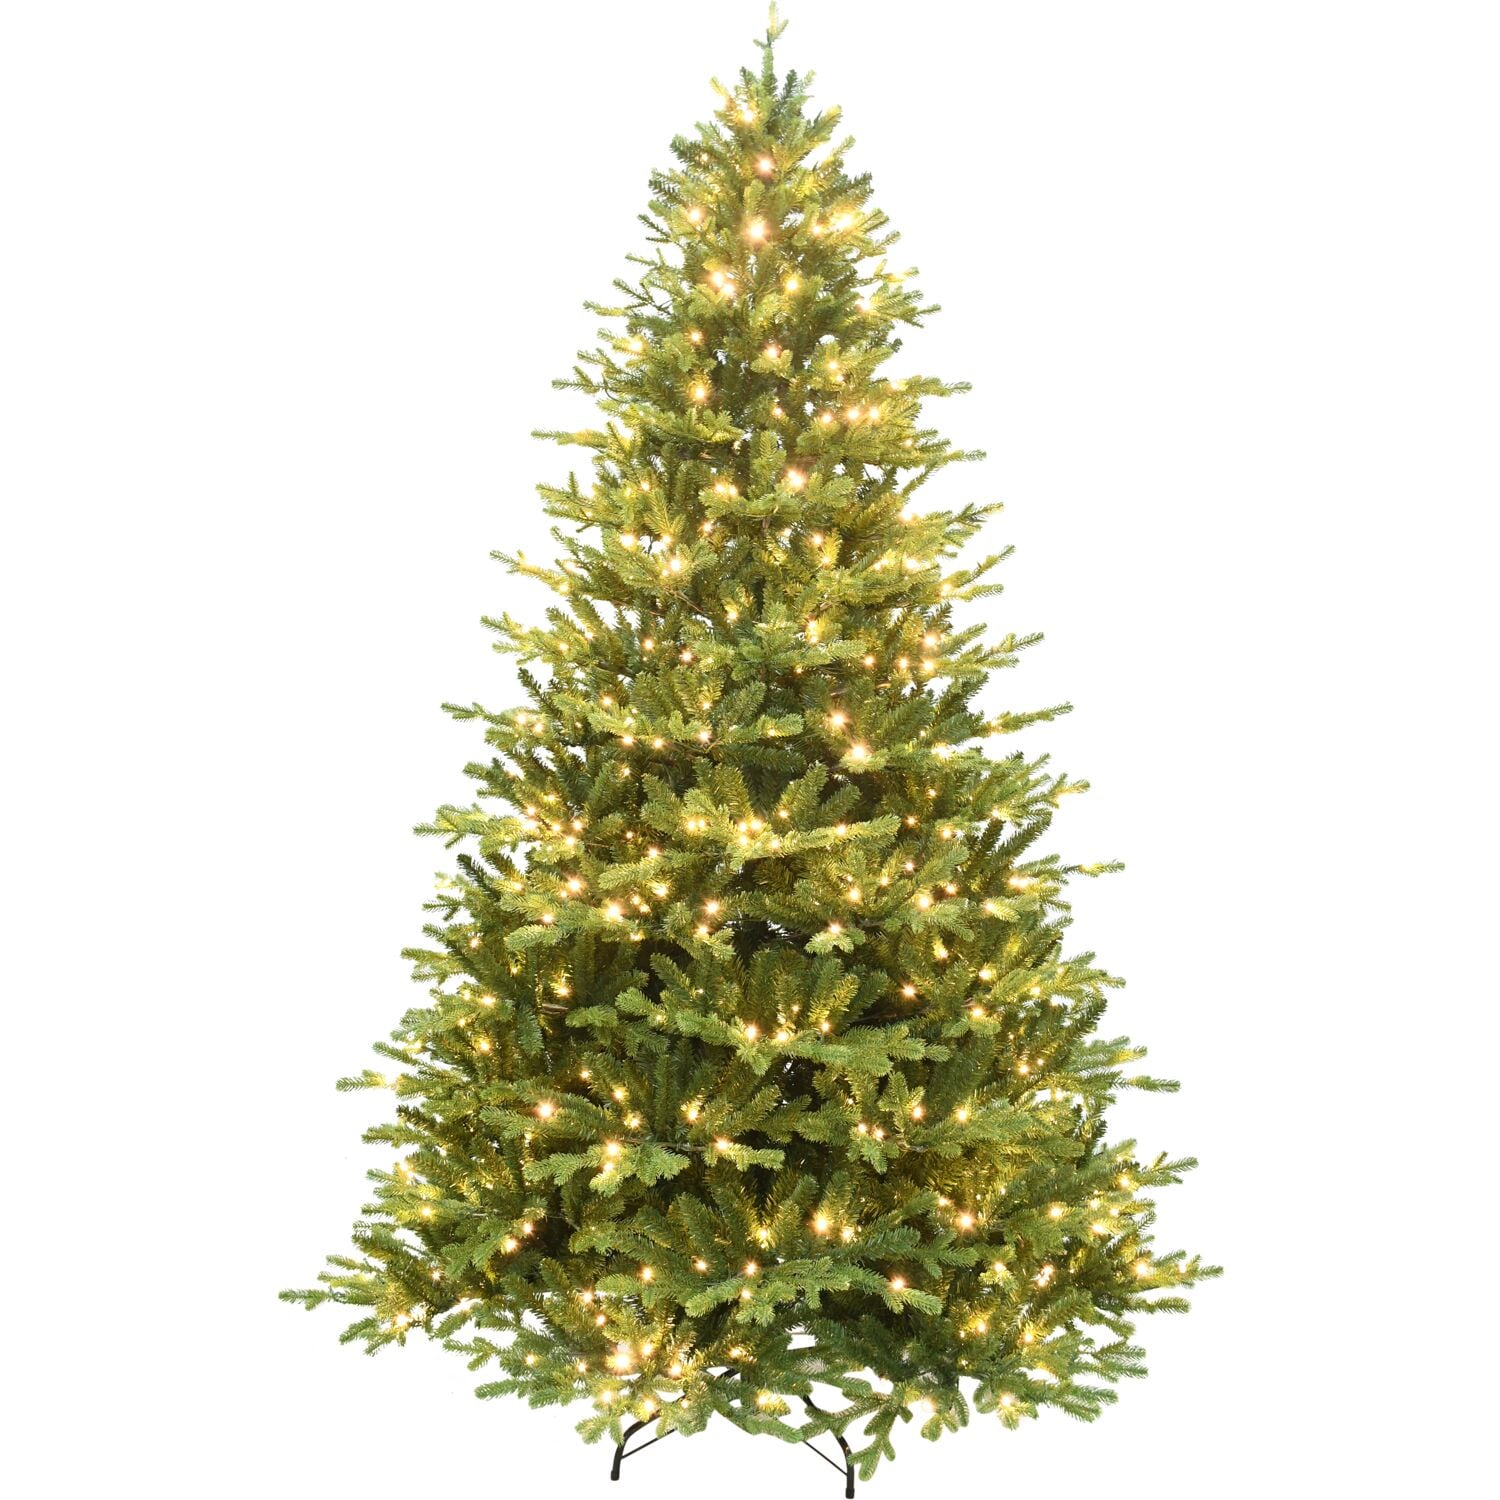 Fraser Hill Farm Artificial Christmas Trees at Lowes.com